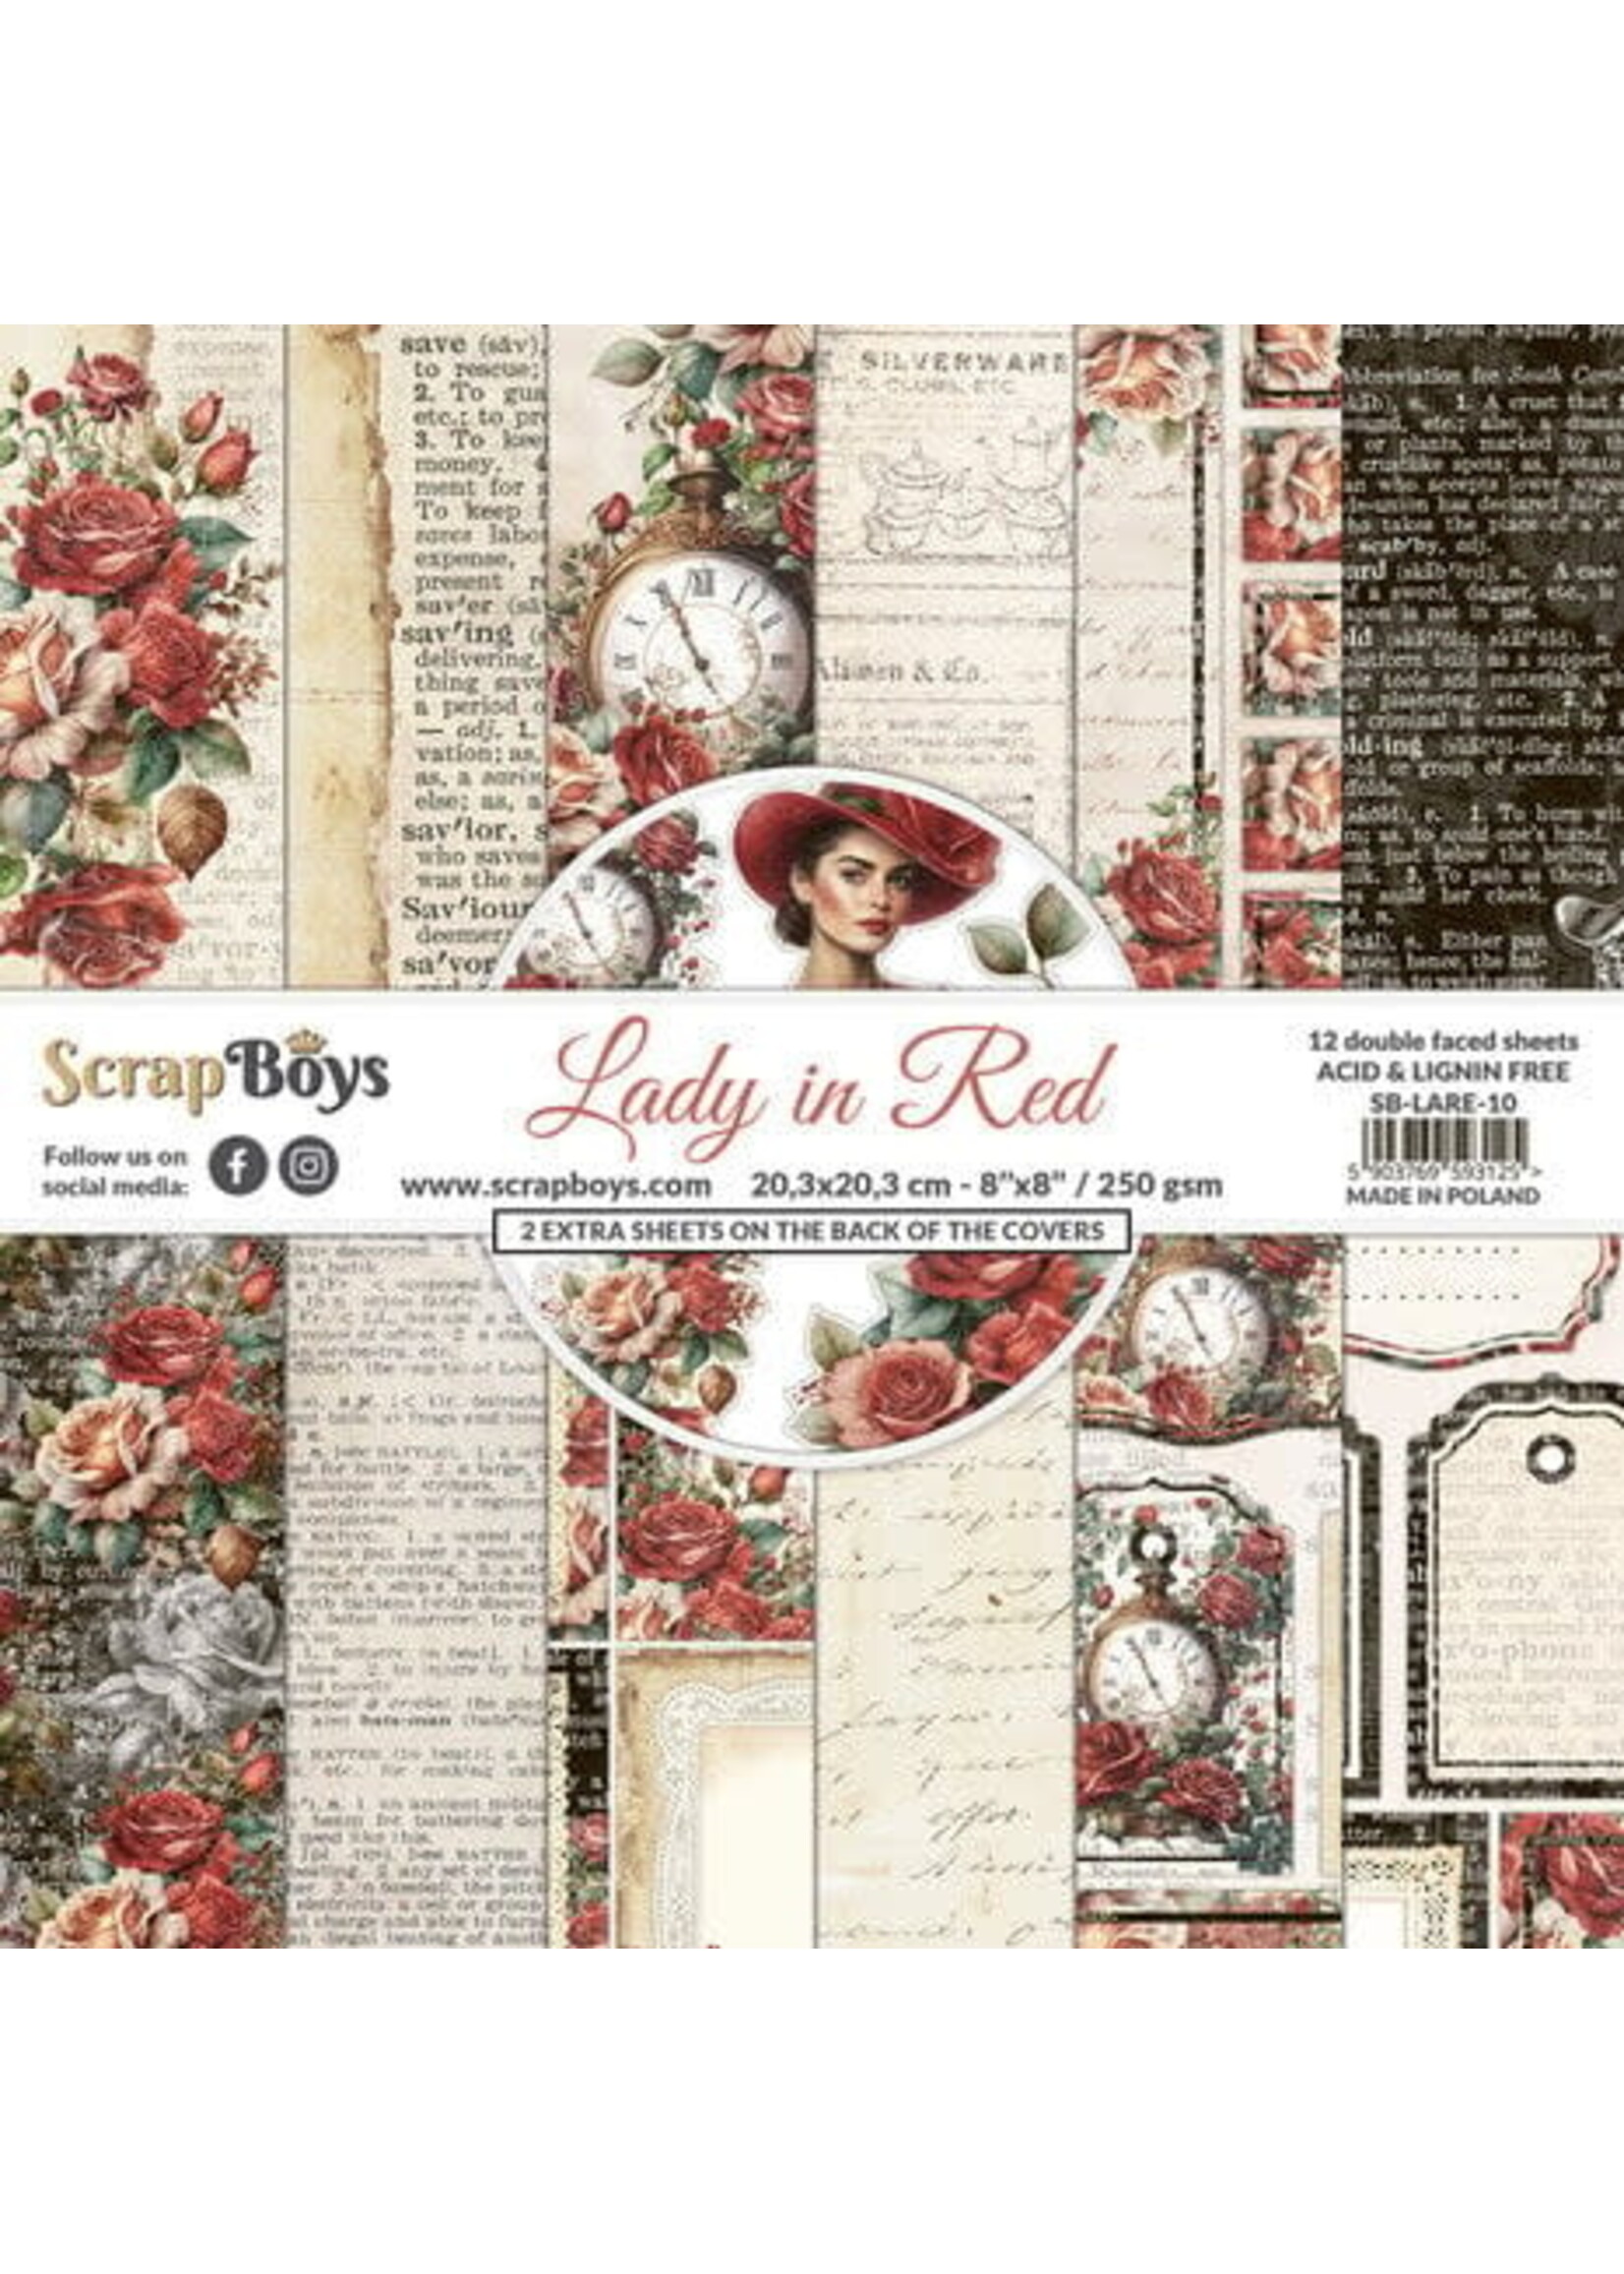 Scrapboys Lady in Red 8x8 Inch Paper Pad (SB-LARE-10)